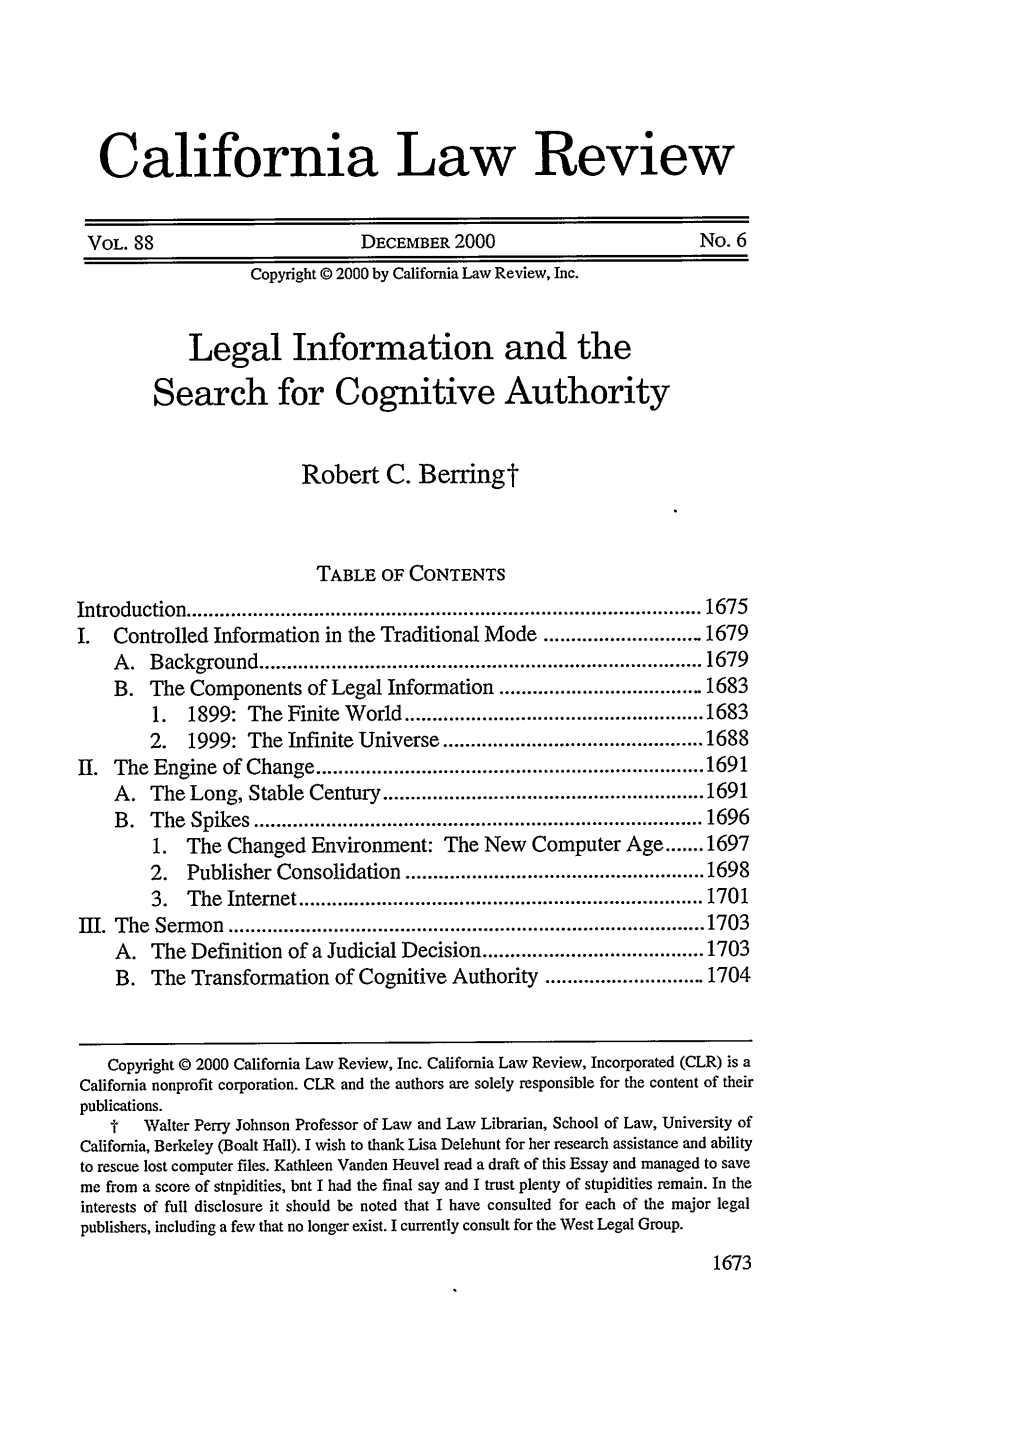 Legal Information and the Search for Cognitive Authority